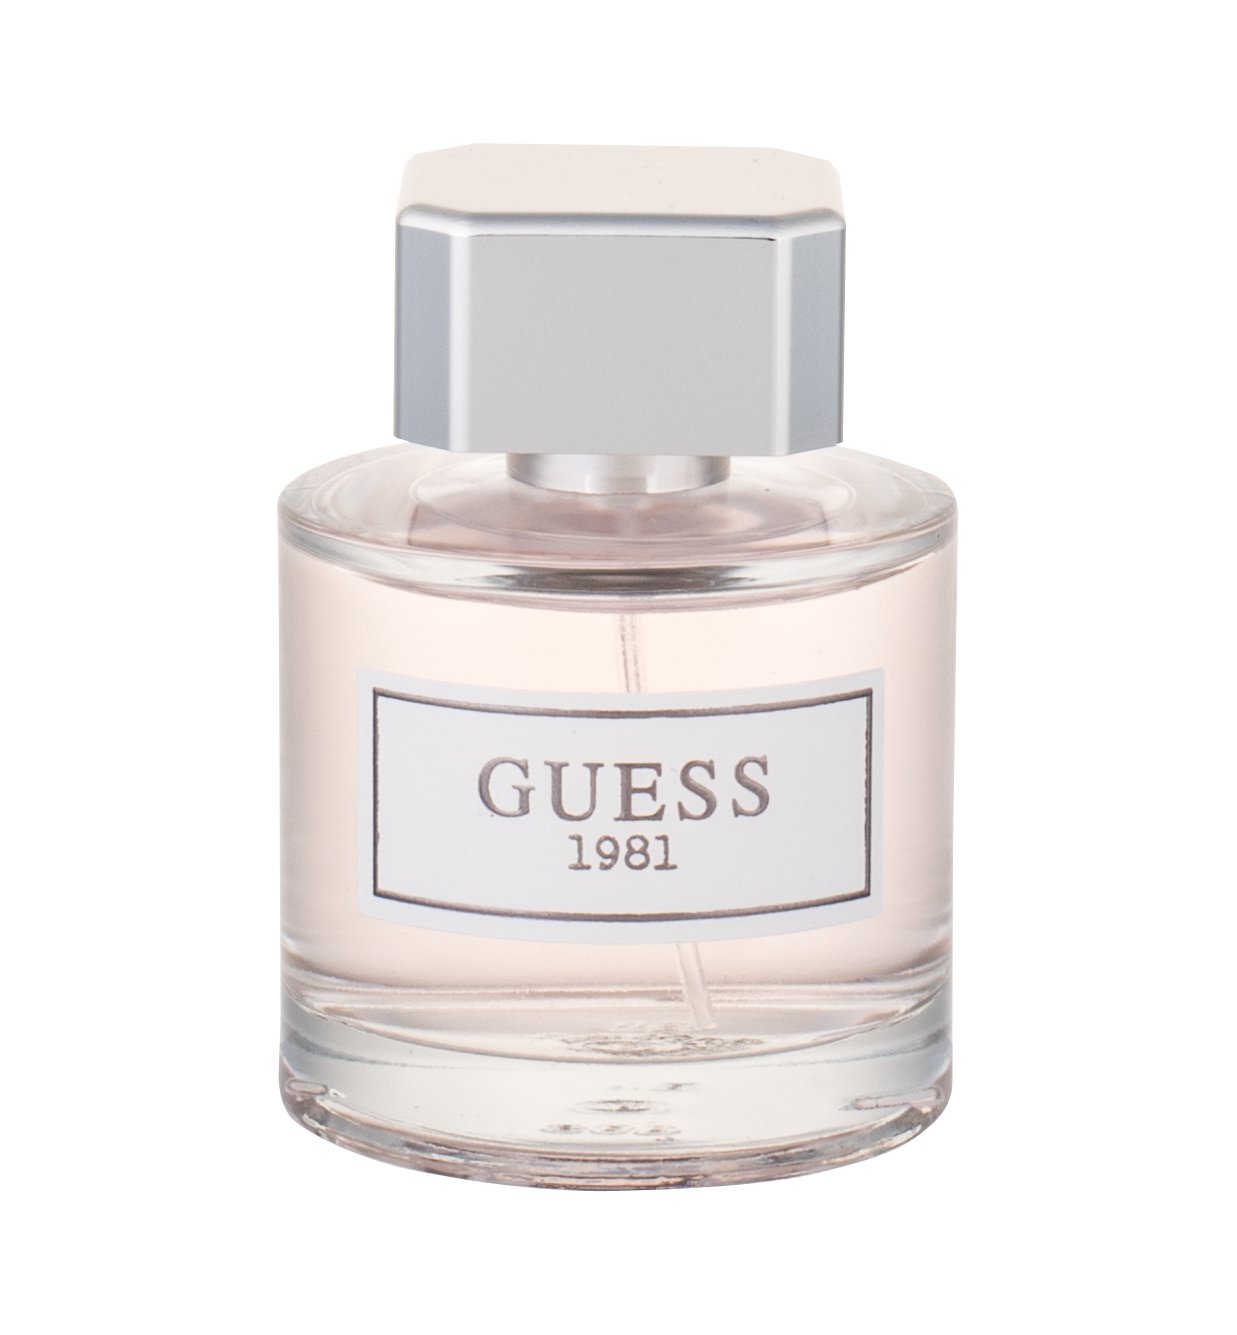 GUESS Guess 1981, edt 50ml